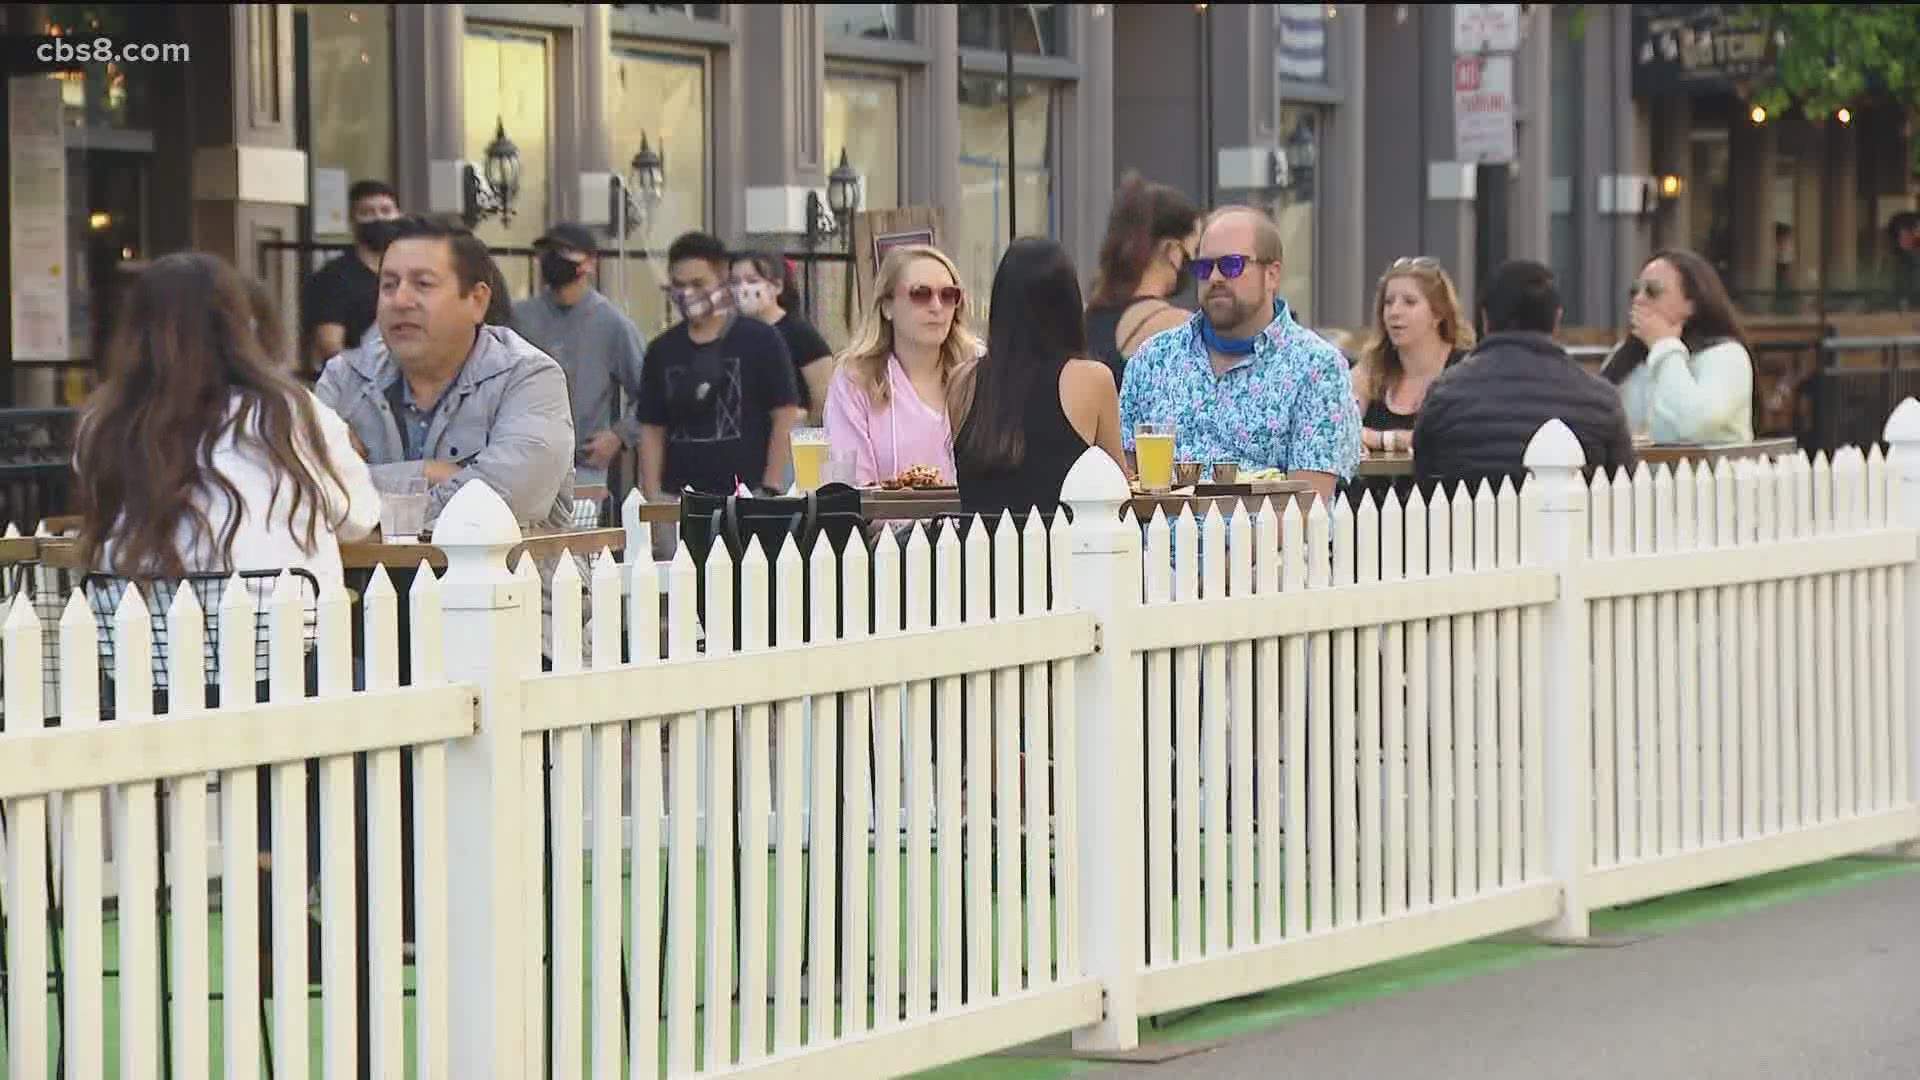 News 8's Abbie Alford reports from downtown San Diego with the effort to control crowds and keep diners socially distant.